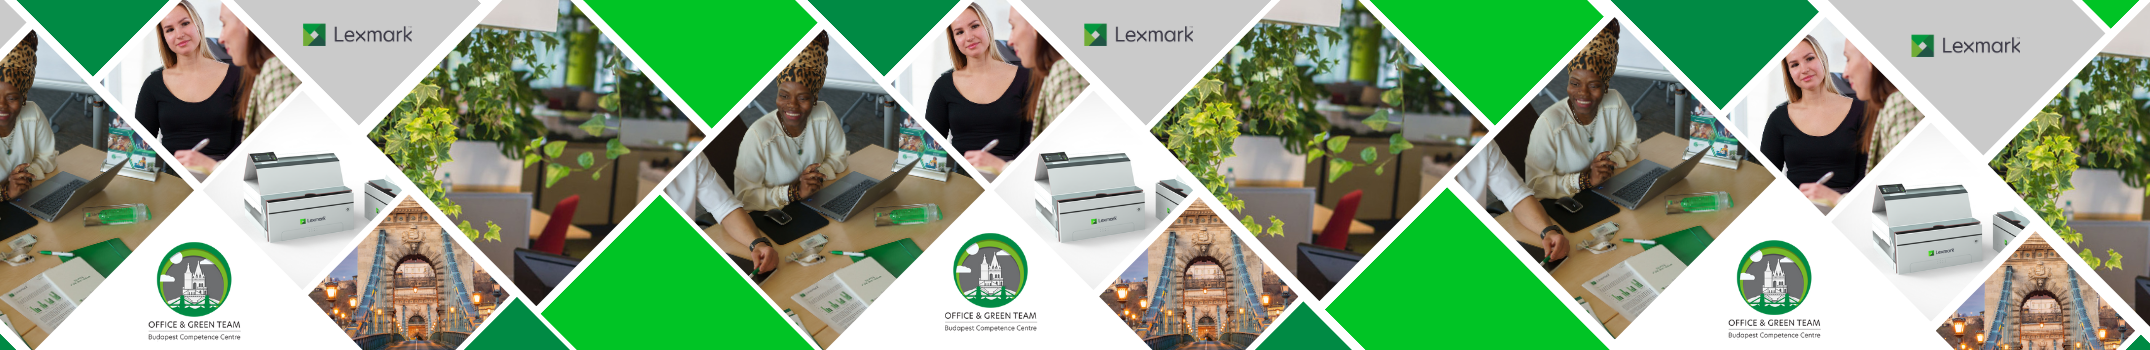 Lexmark banner 2150x350 - Office and green Team